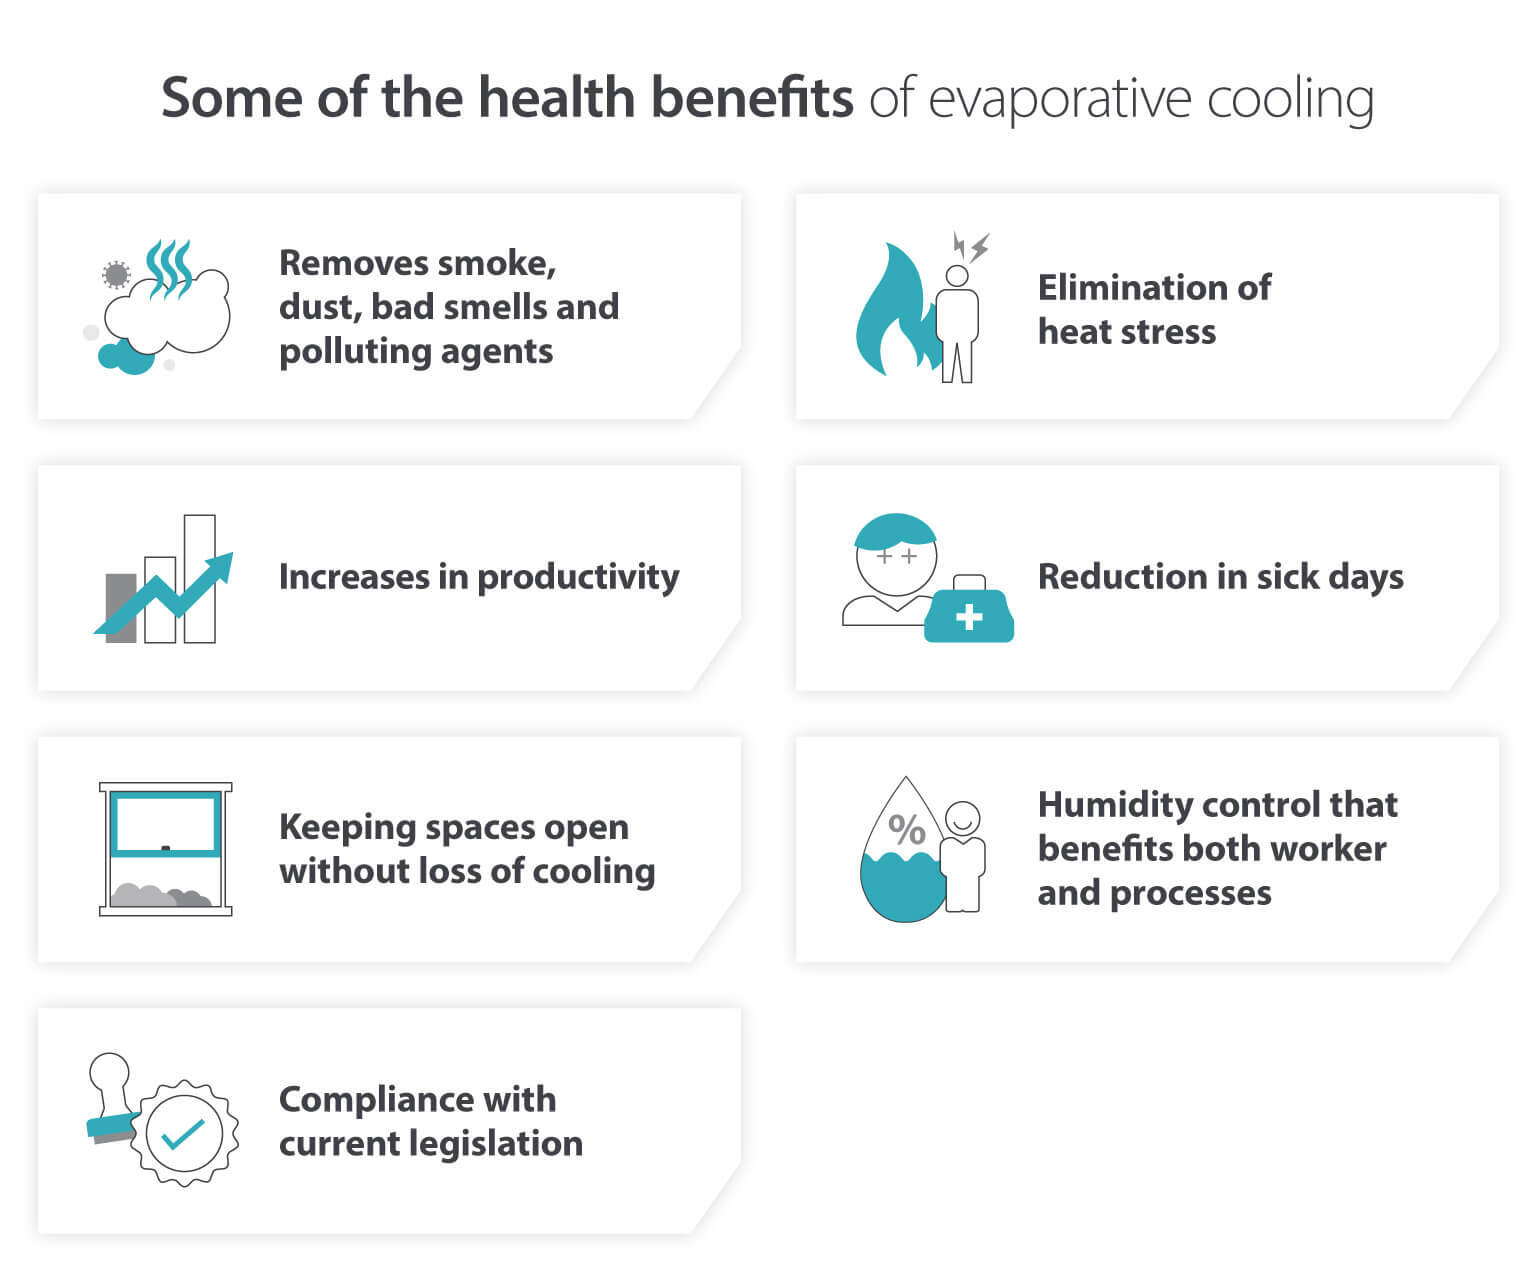 Health benefits of evaporative cooling